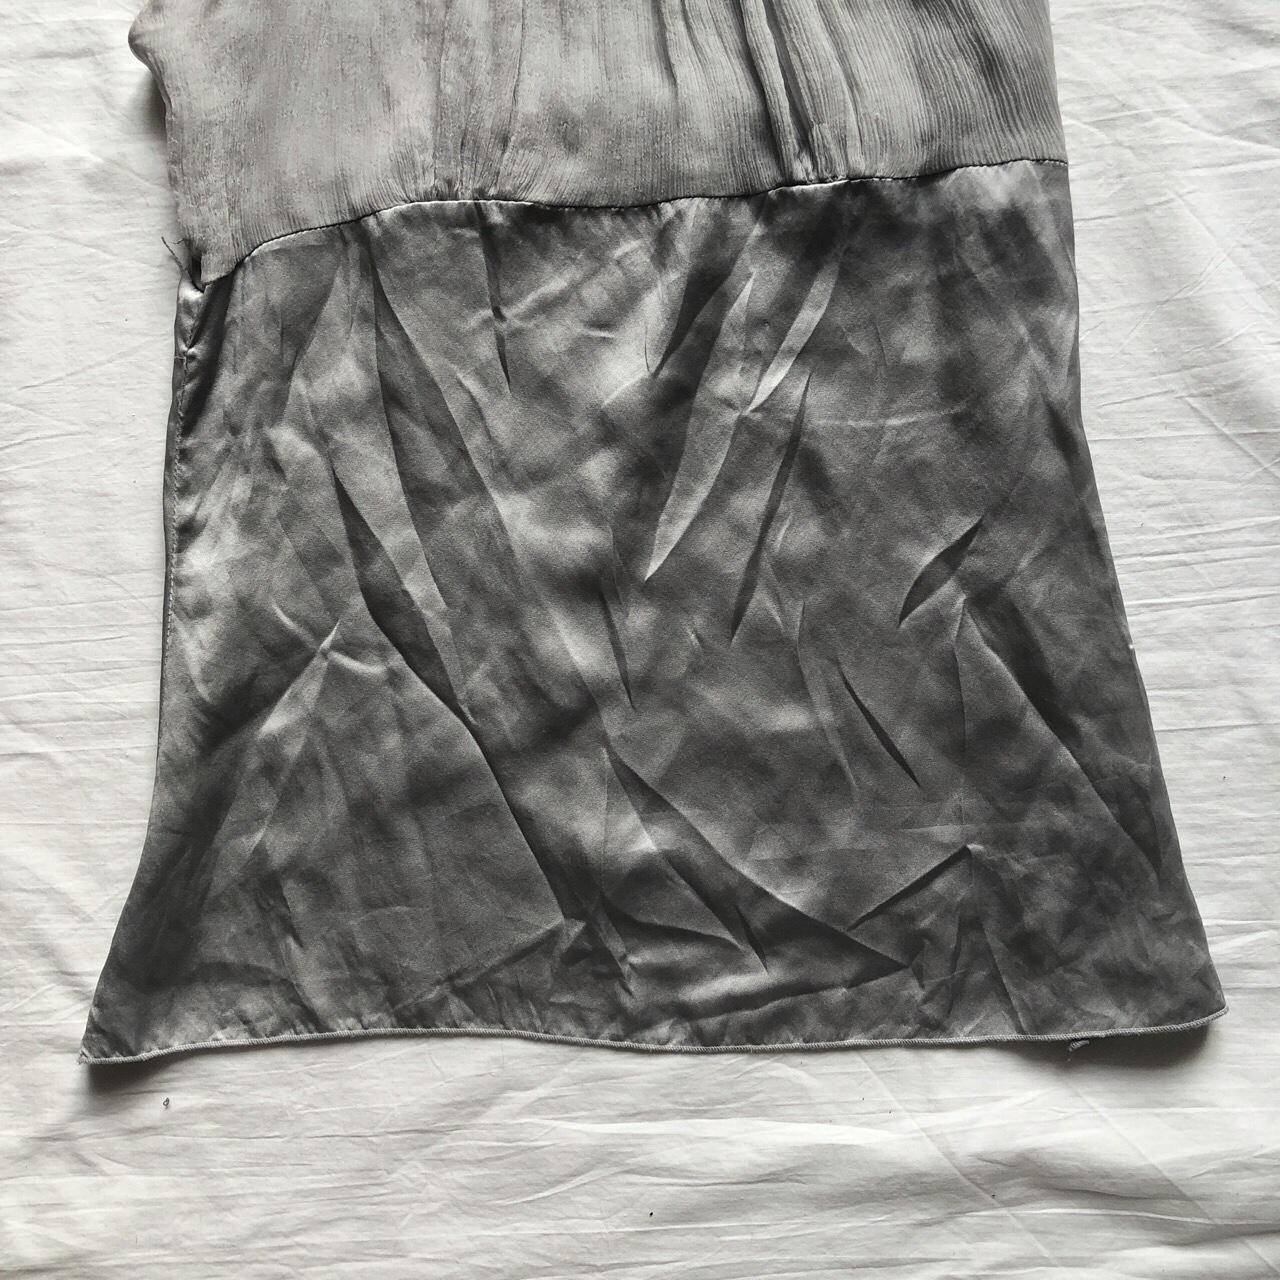 Product Image 3 - Intimissimi silver top

No size or